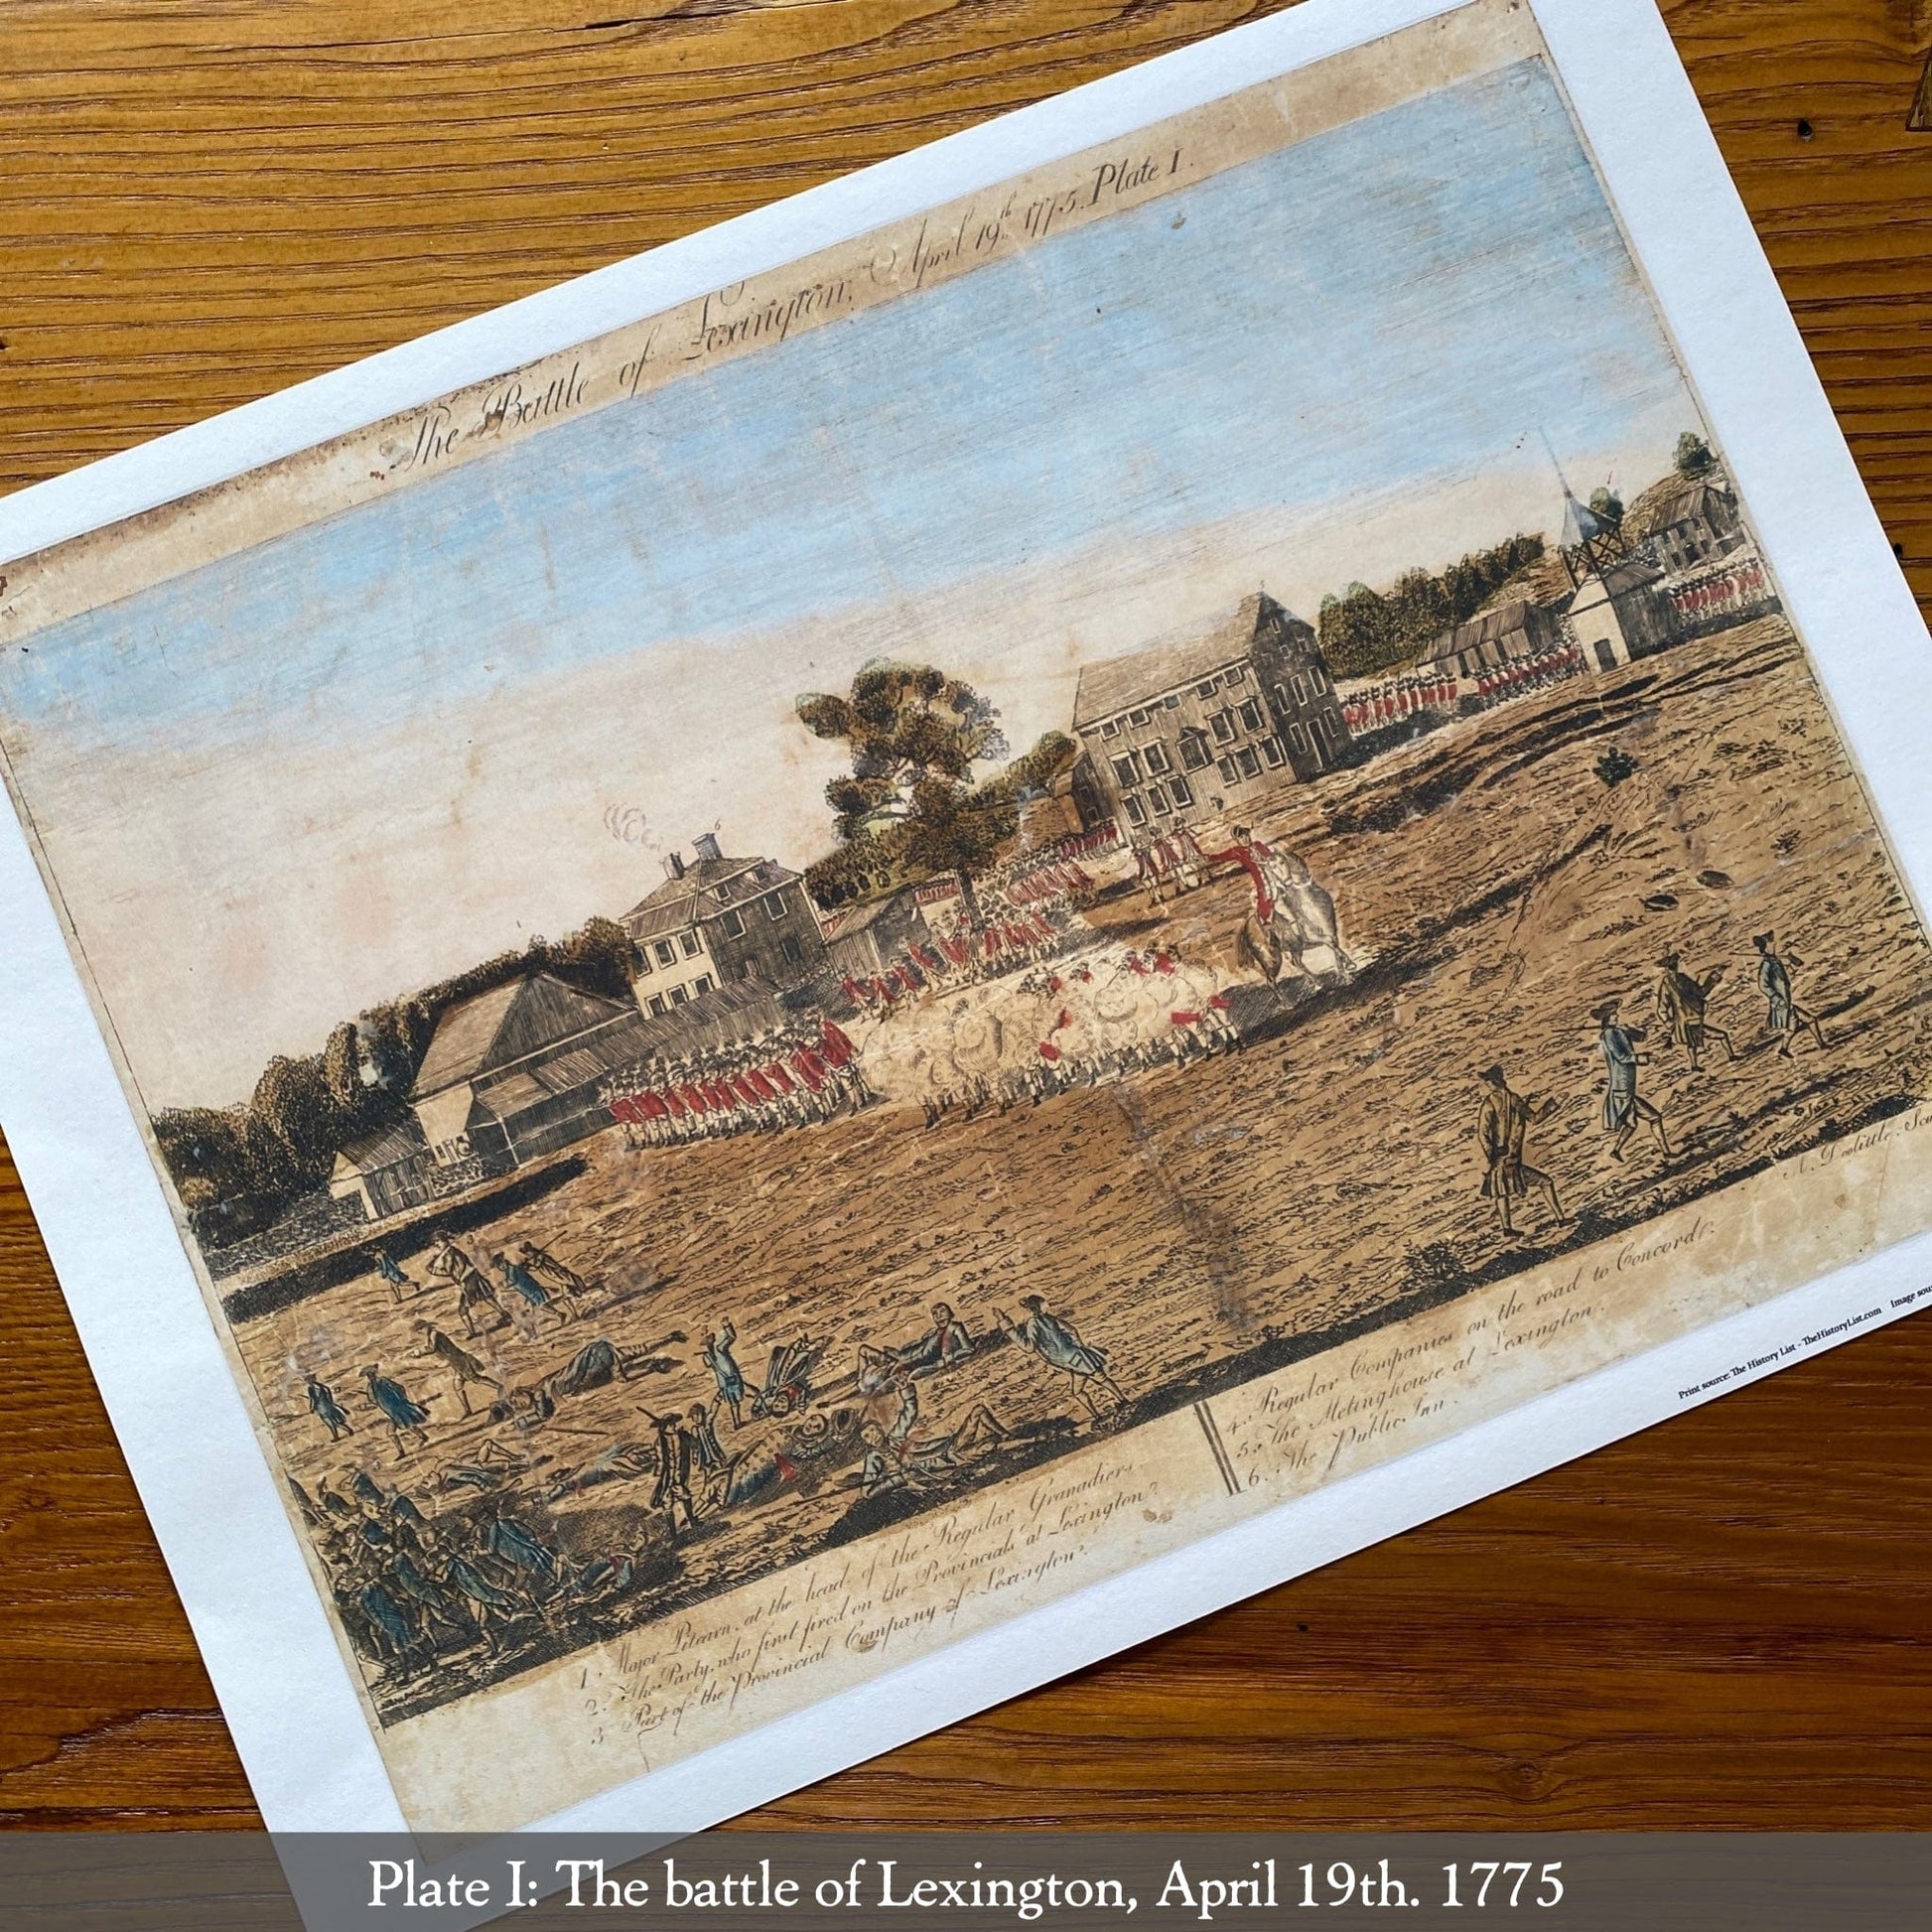 Plate 1: The Battle of Lexington - "The Doolittle Engravings of the Battle of Lexington and Concord" Archival Print from the history list store